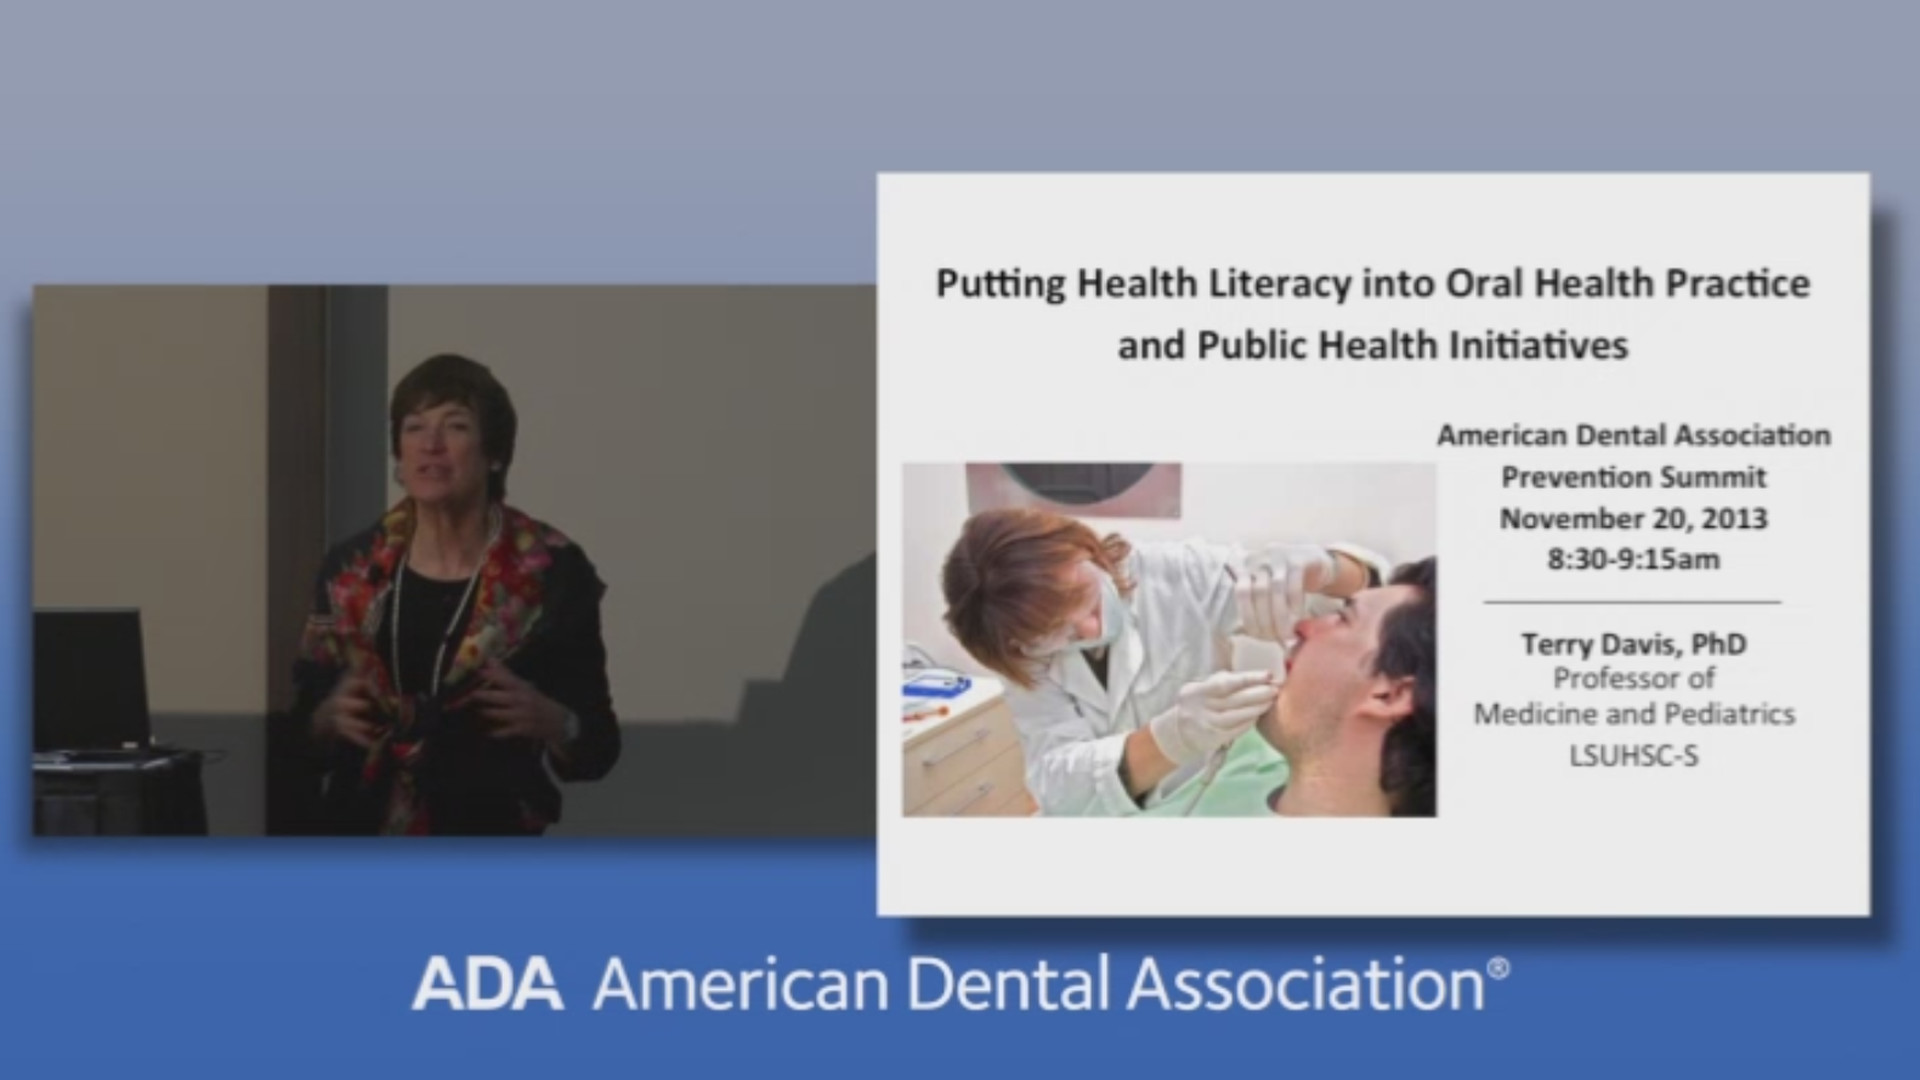 Putting Health Literacy into Oral Health Practice and Public Health Initiatives